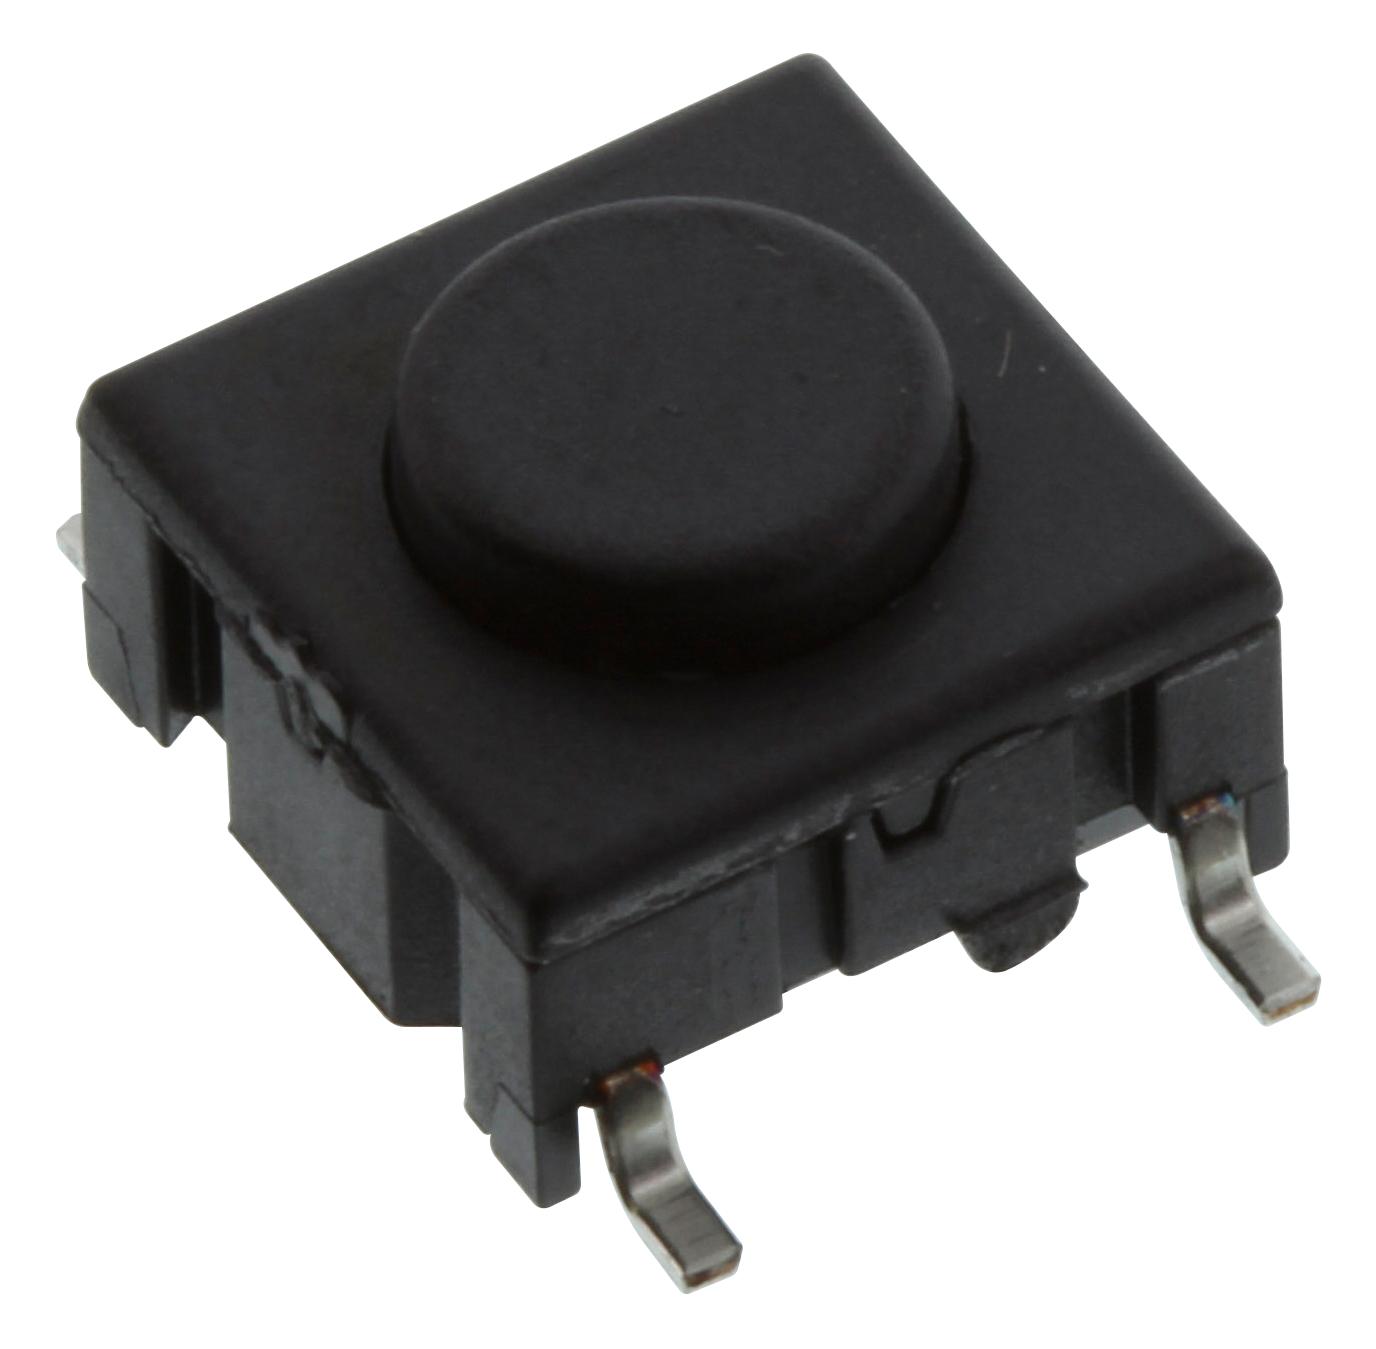 APEM 3Csh9 Tactile Switch, 0.05A, 24Vdc, Smd